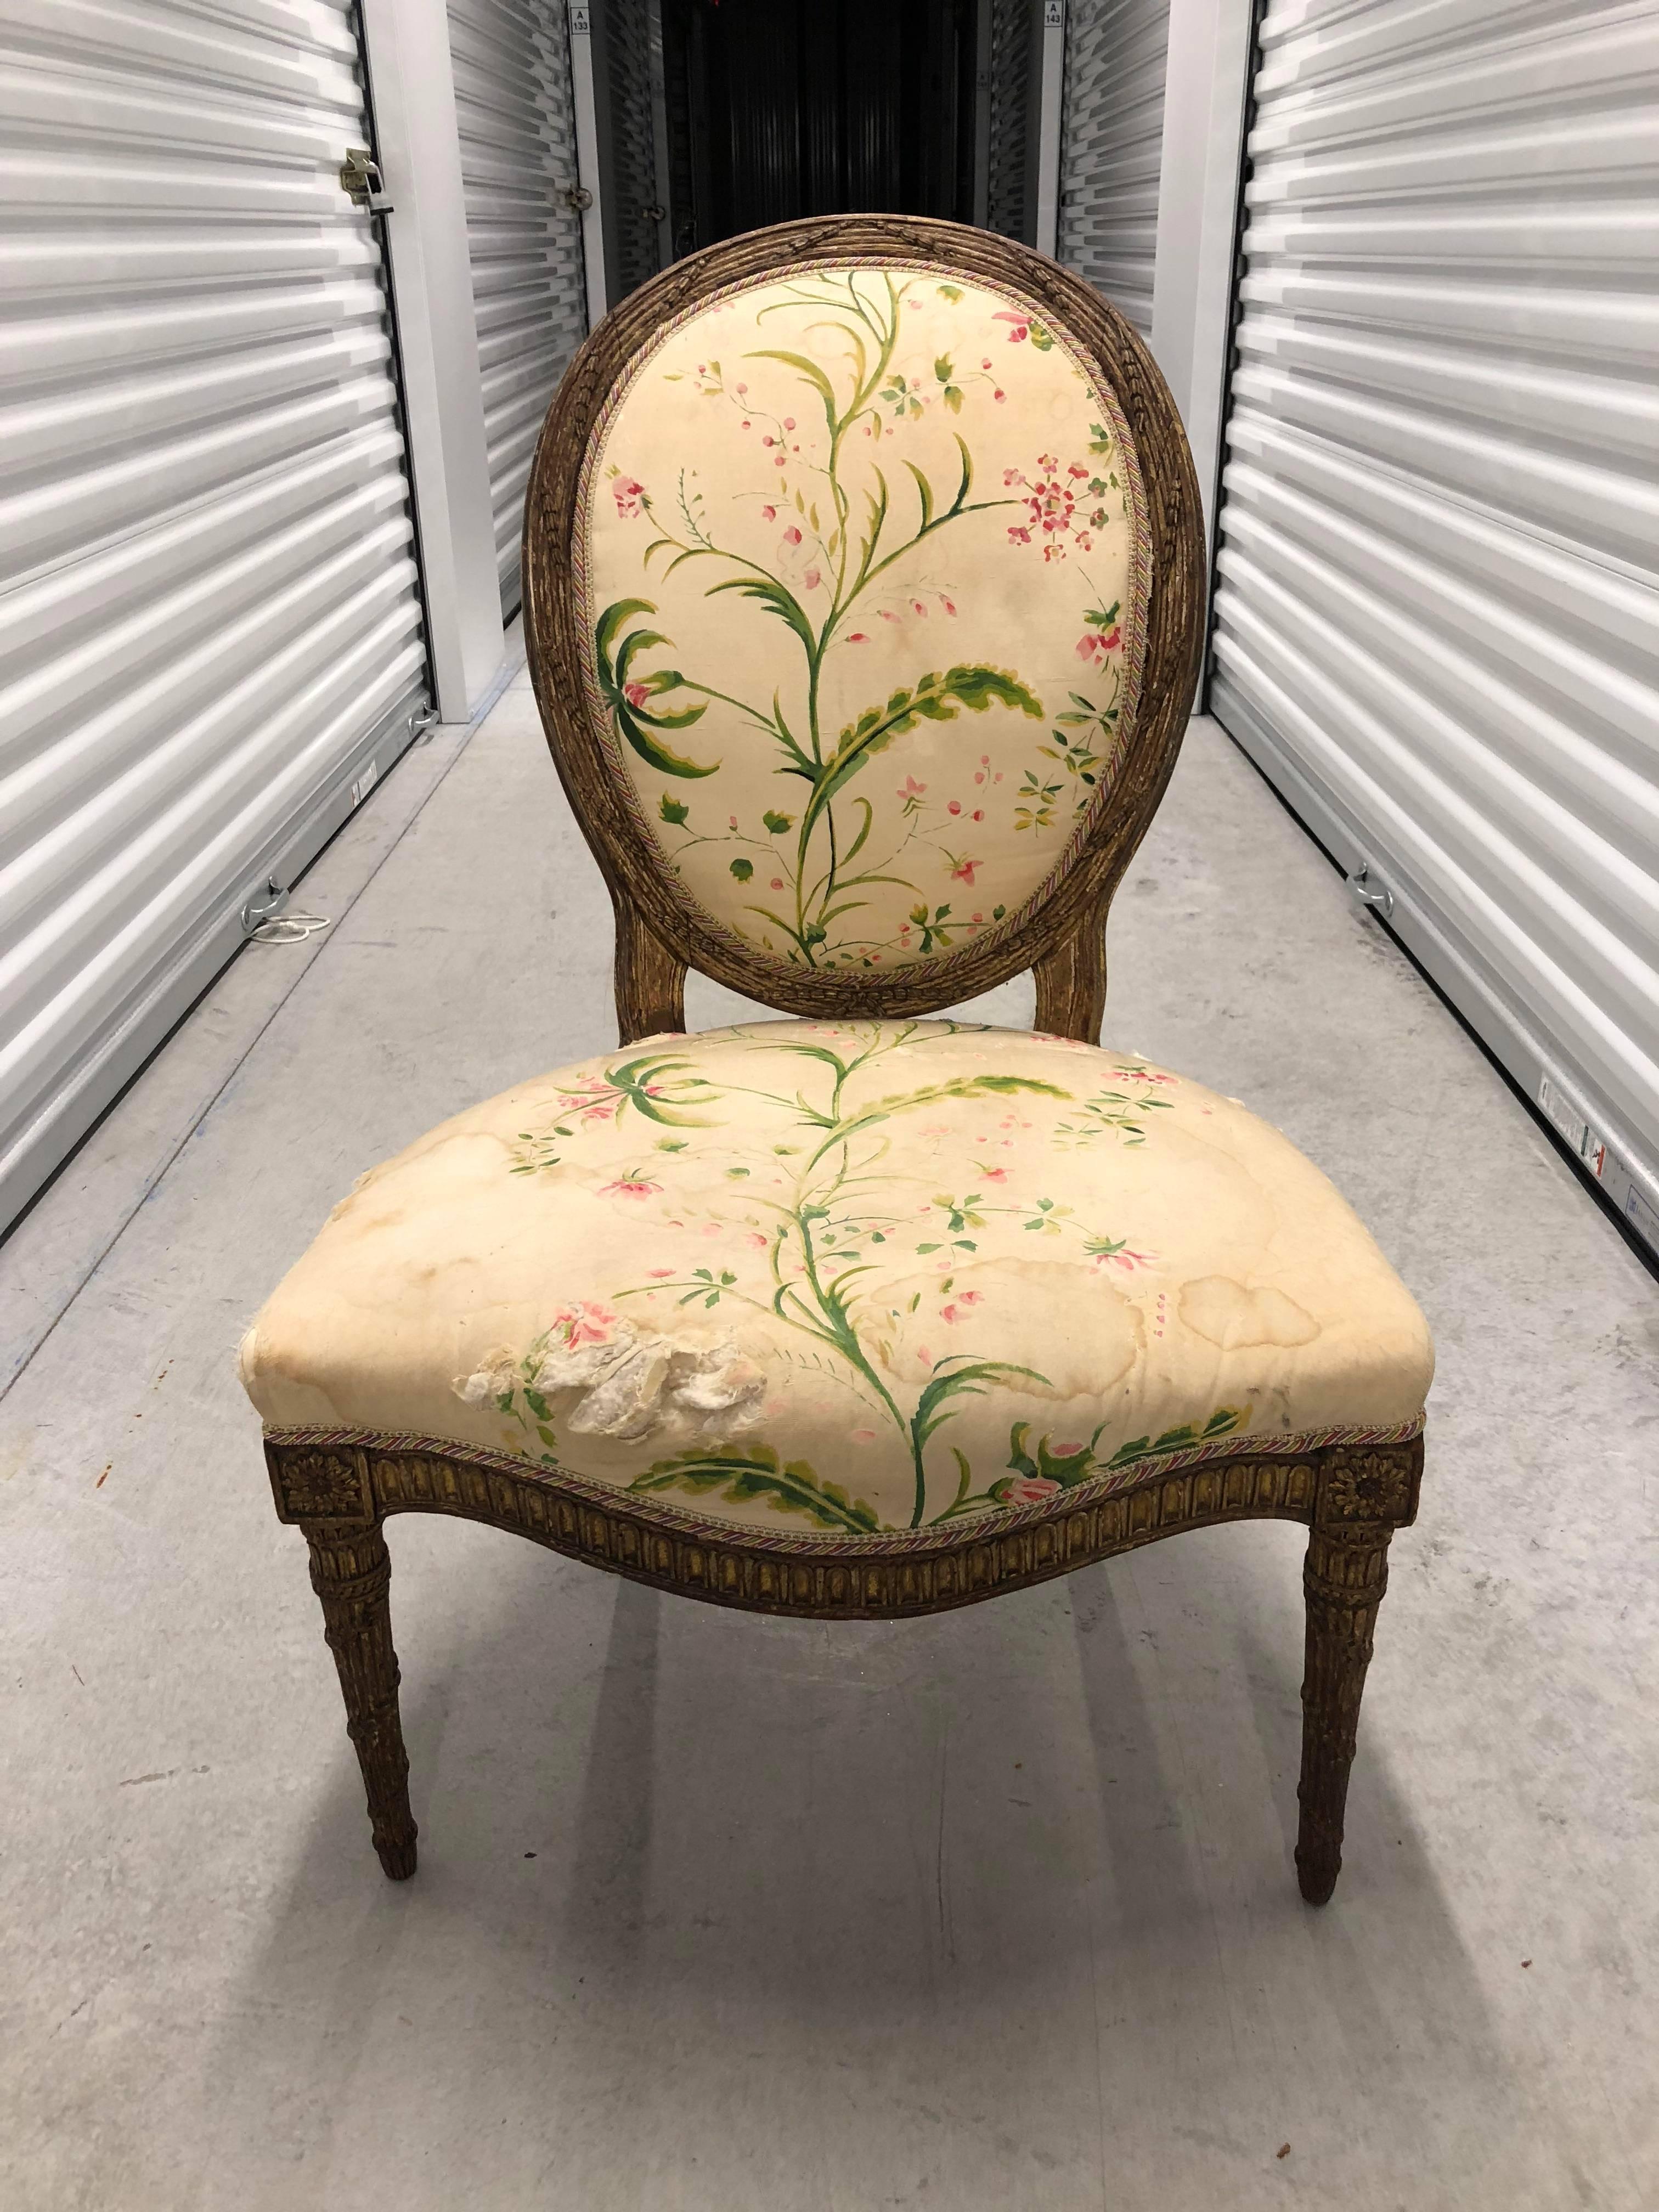 Louis XVI period carved giltwood side chair, circa 1775; French (or possibly English in the French taste); oval back, serpentine front, upholstered seat raised on turned and foliage carved frontal legs.